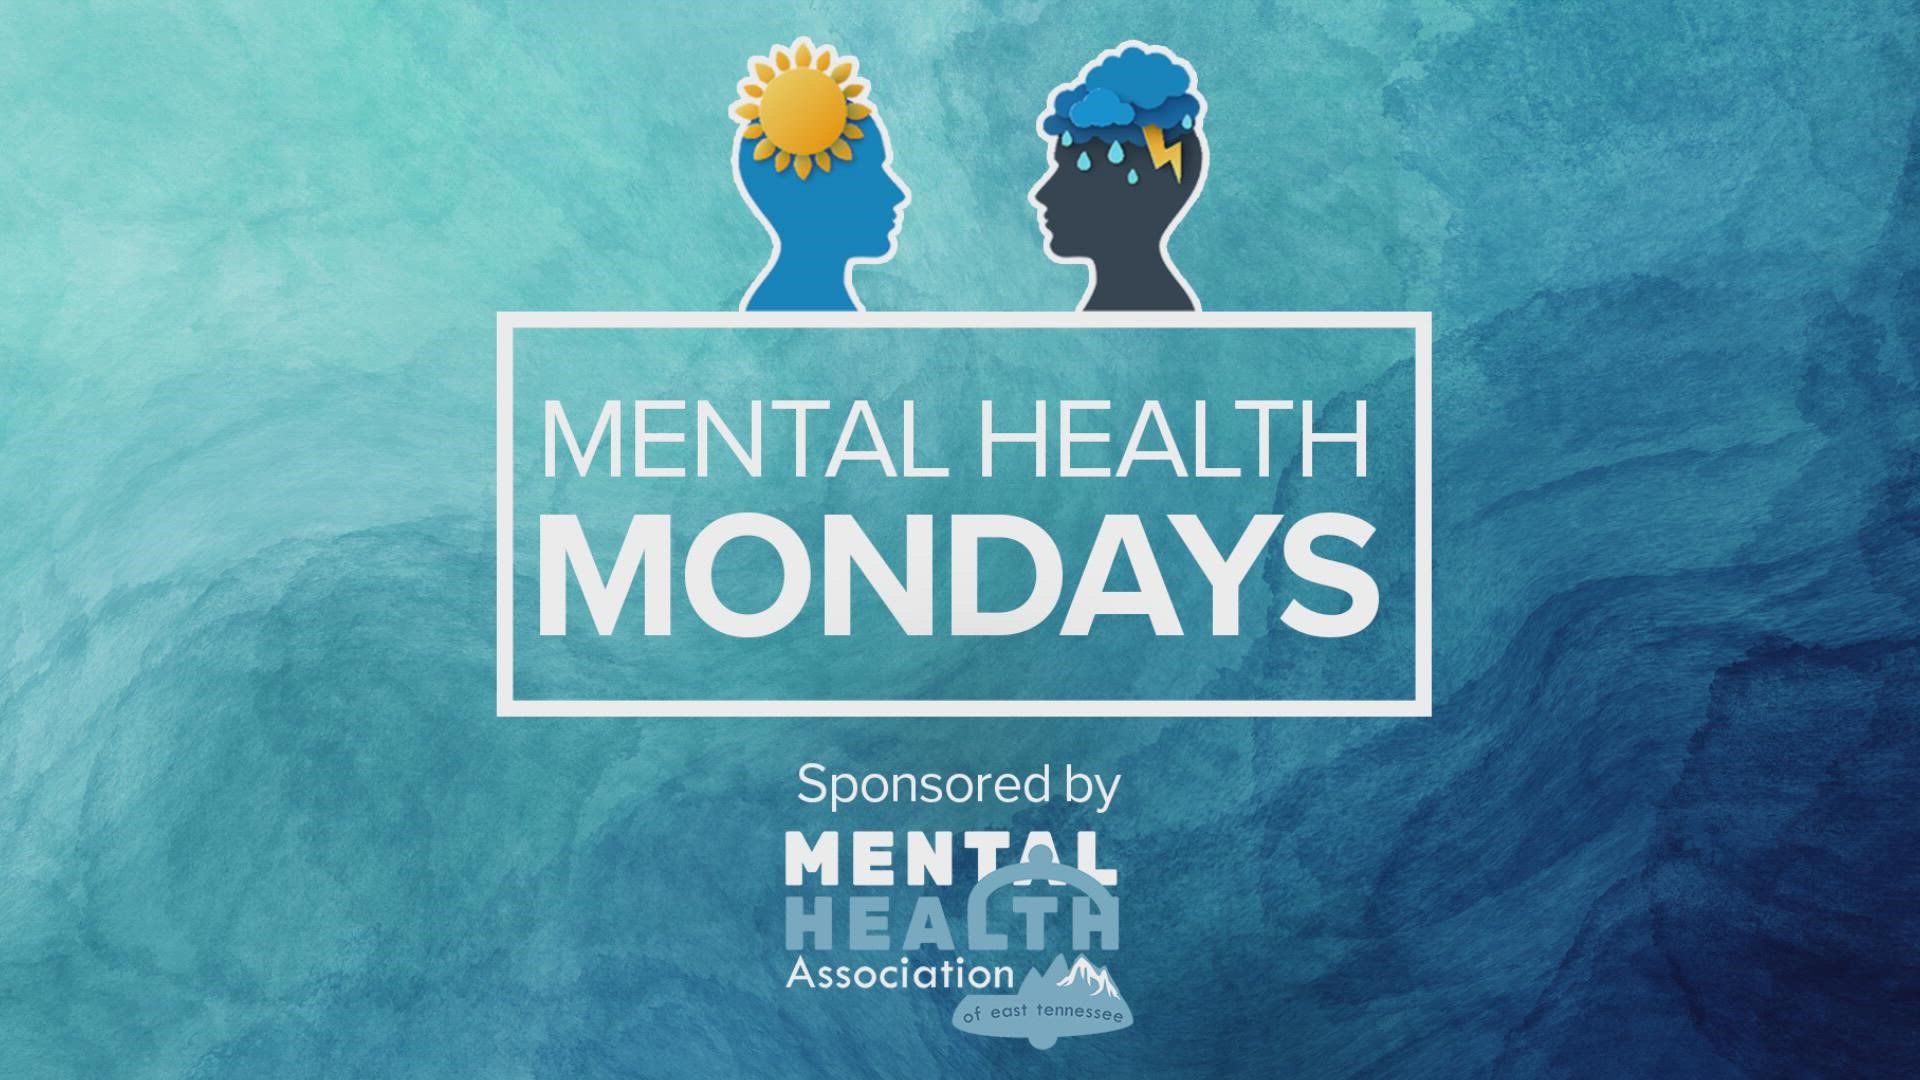 We want to encourage everyone to recognize they have a voice when it comes to mental health and mental health awareness.